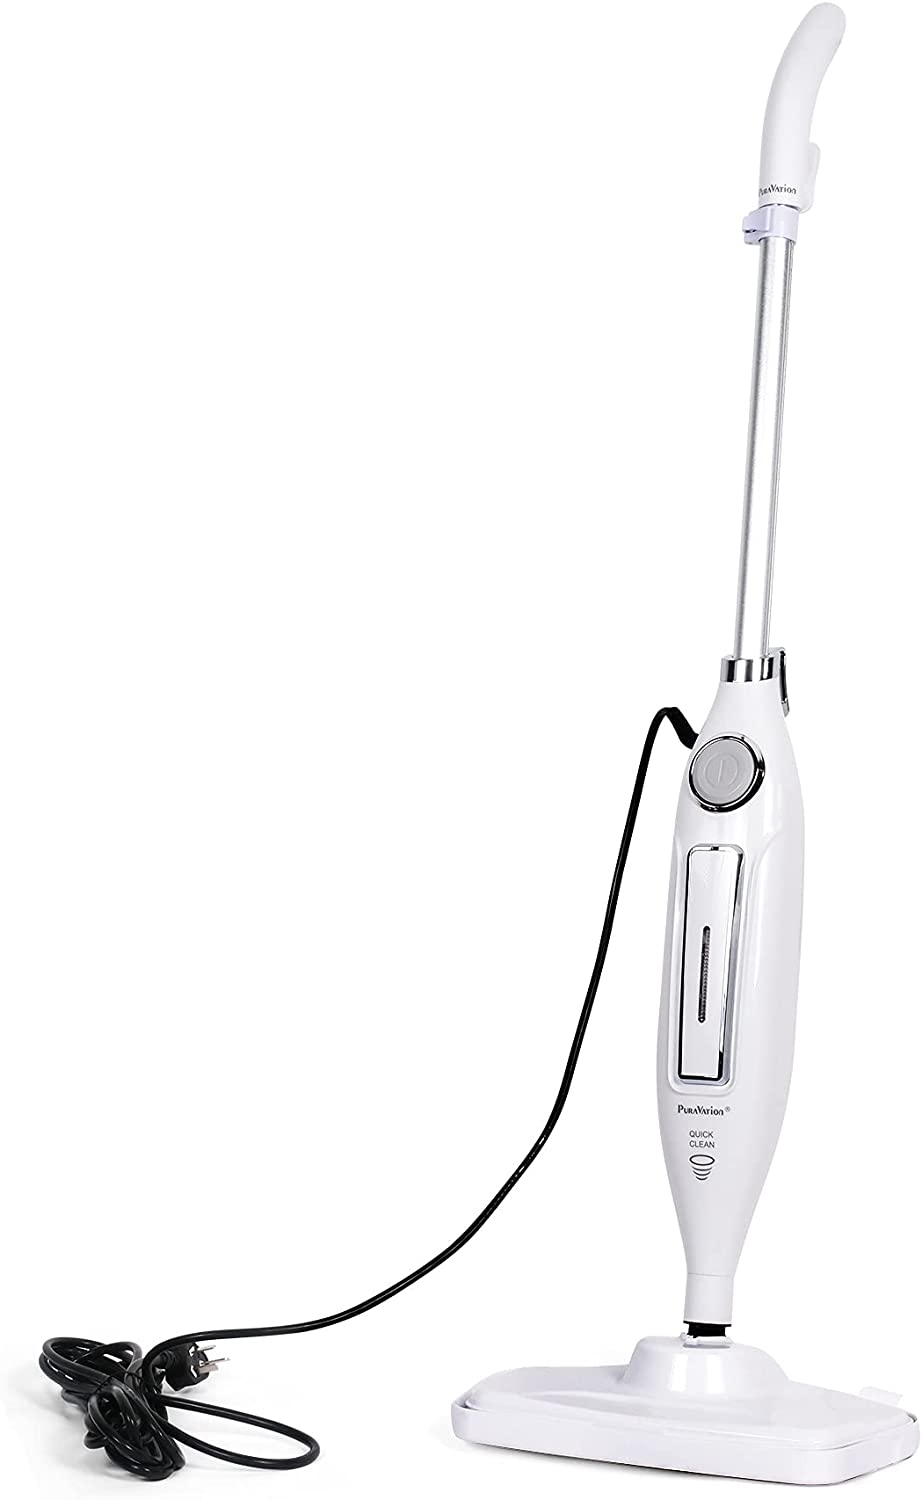 (Out of Stock) Steam Mop for All Floors, Steam Mops with 2 Pads, Cleaning Cleaner Head 180 Degree Turn - Bosonshop